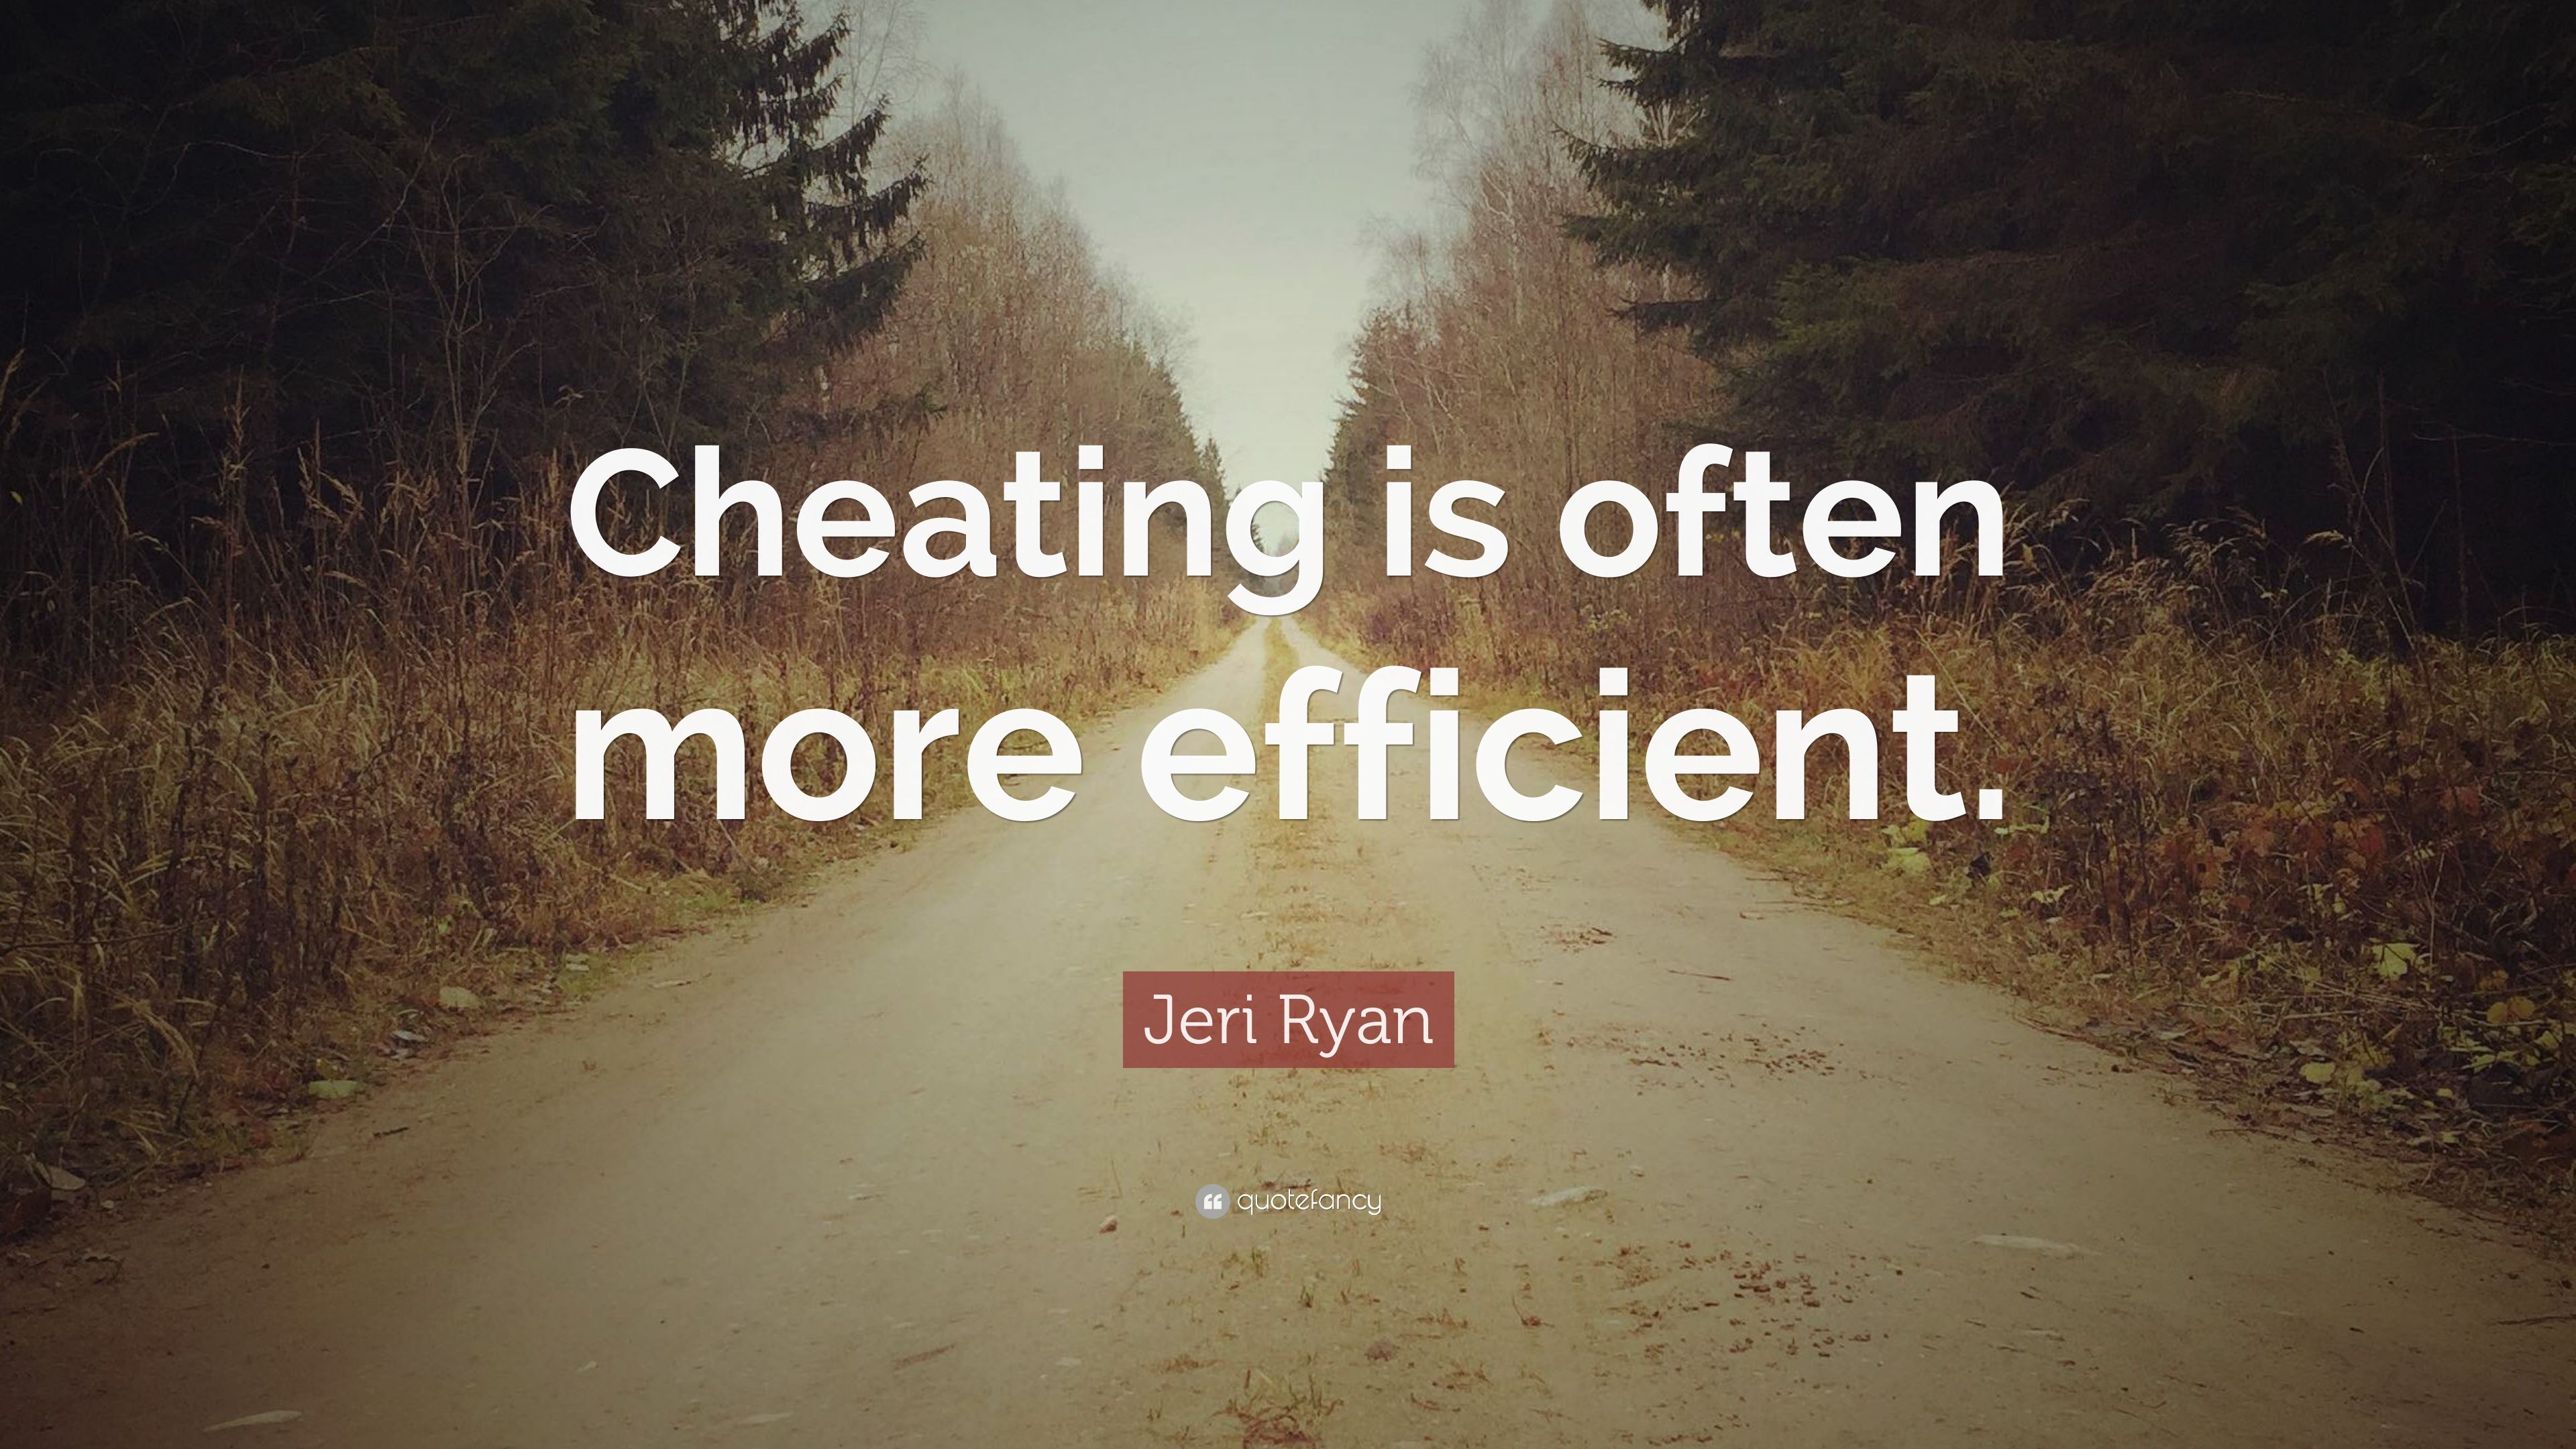 Jeri Ryan Quote: “Cheating is often more efficient.” (7 wallpaper)